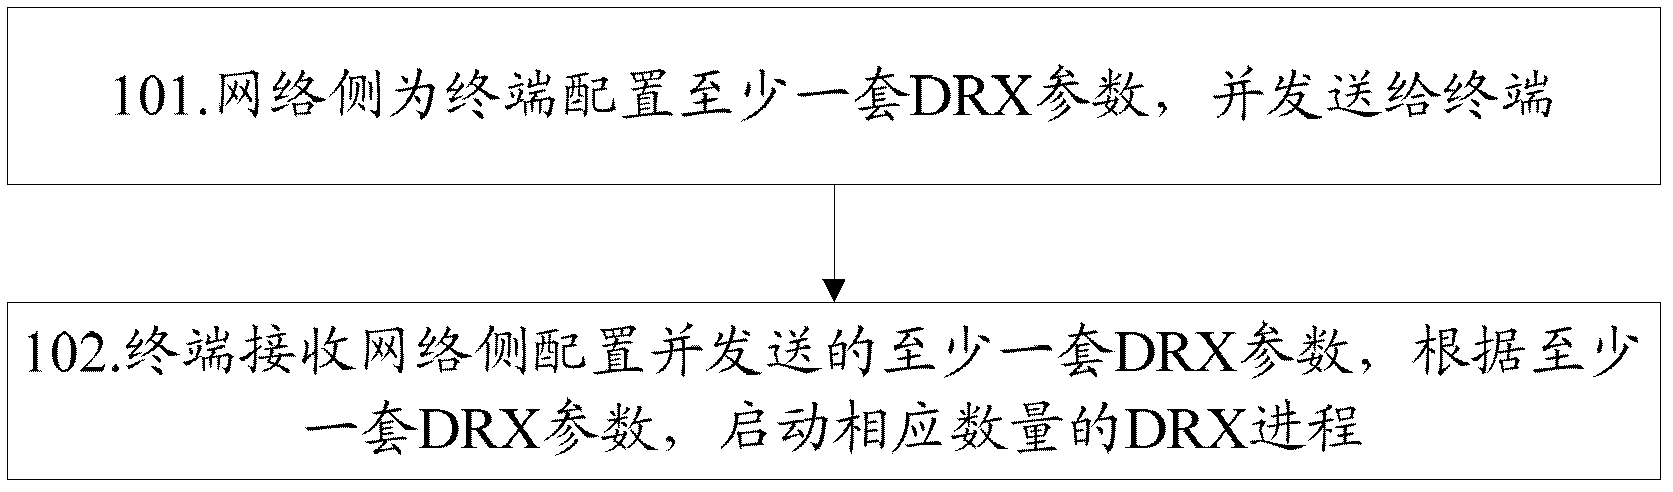 Discontinuous reception (DRX) method and system